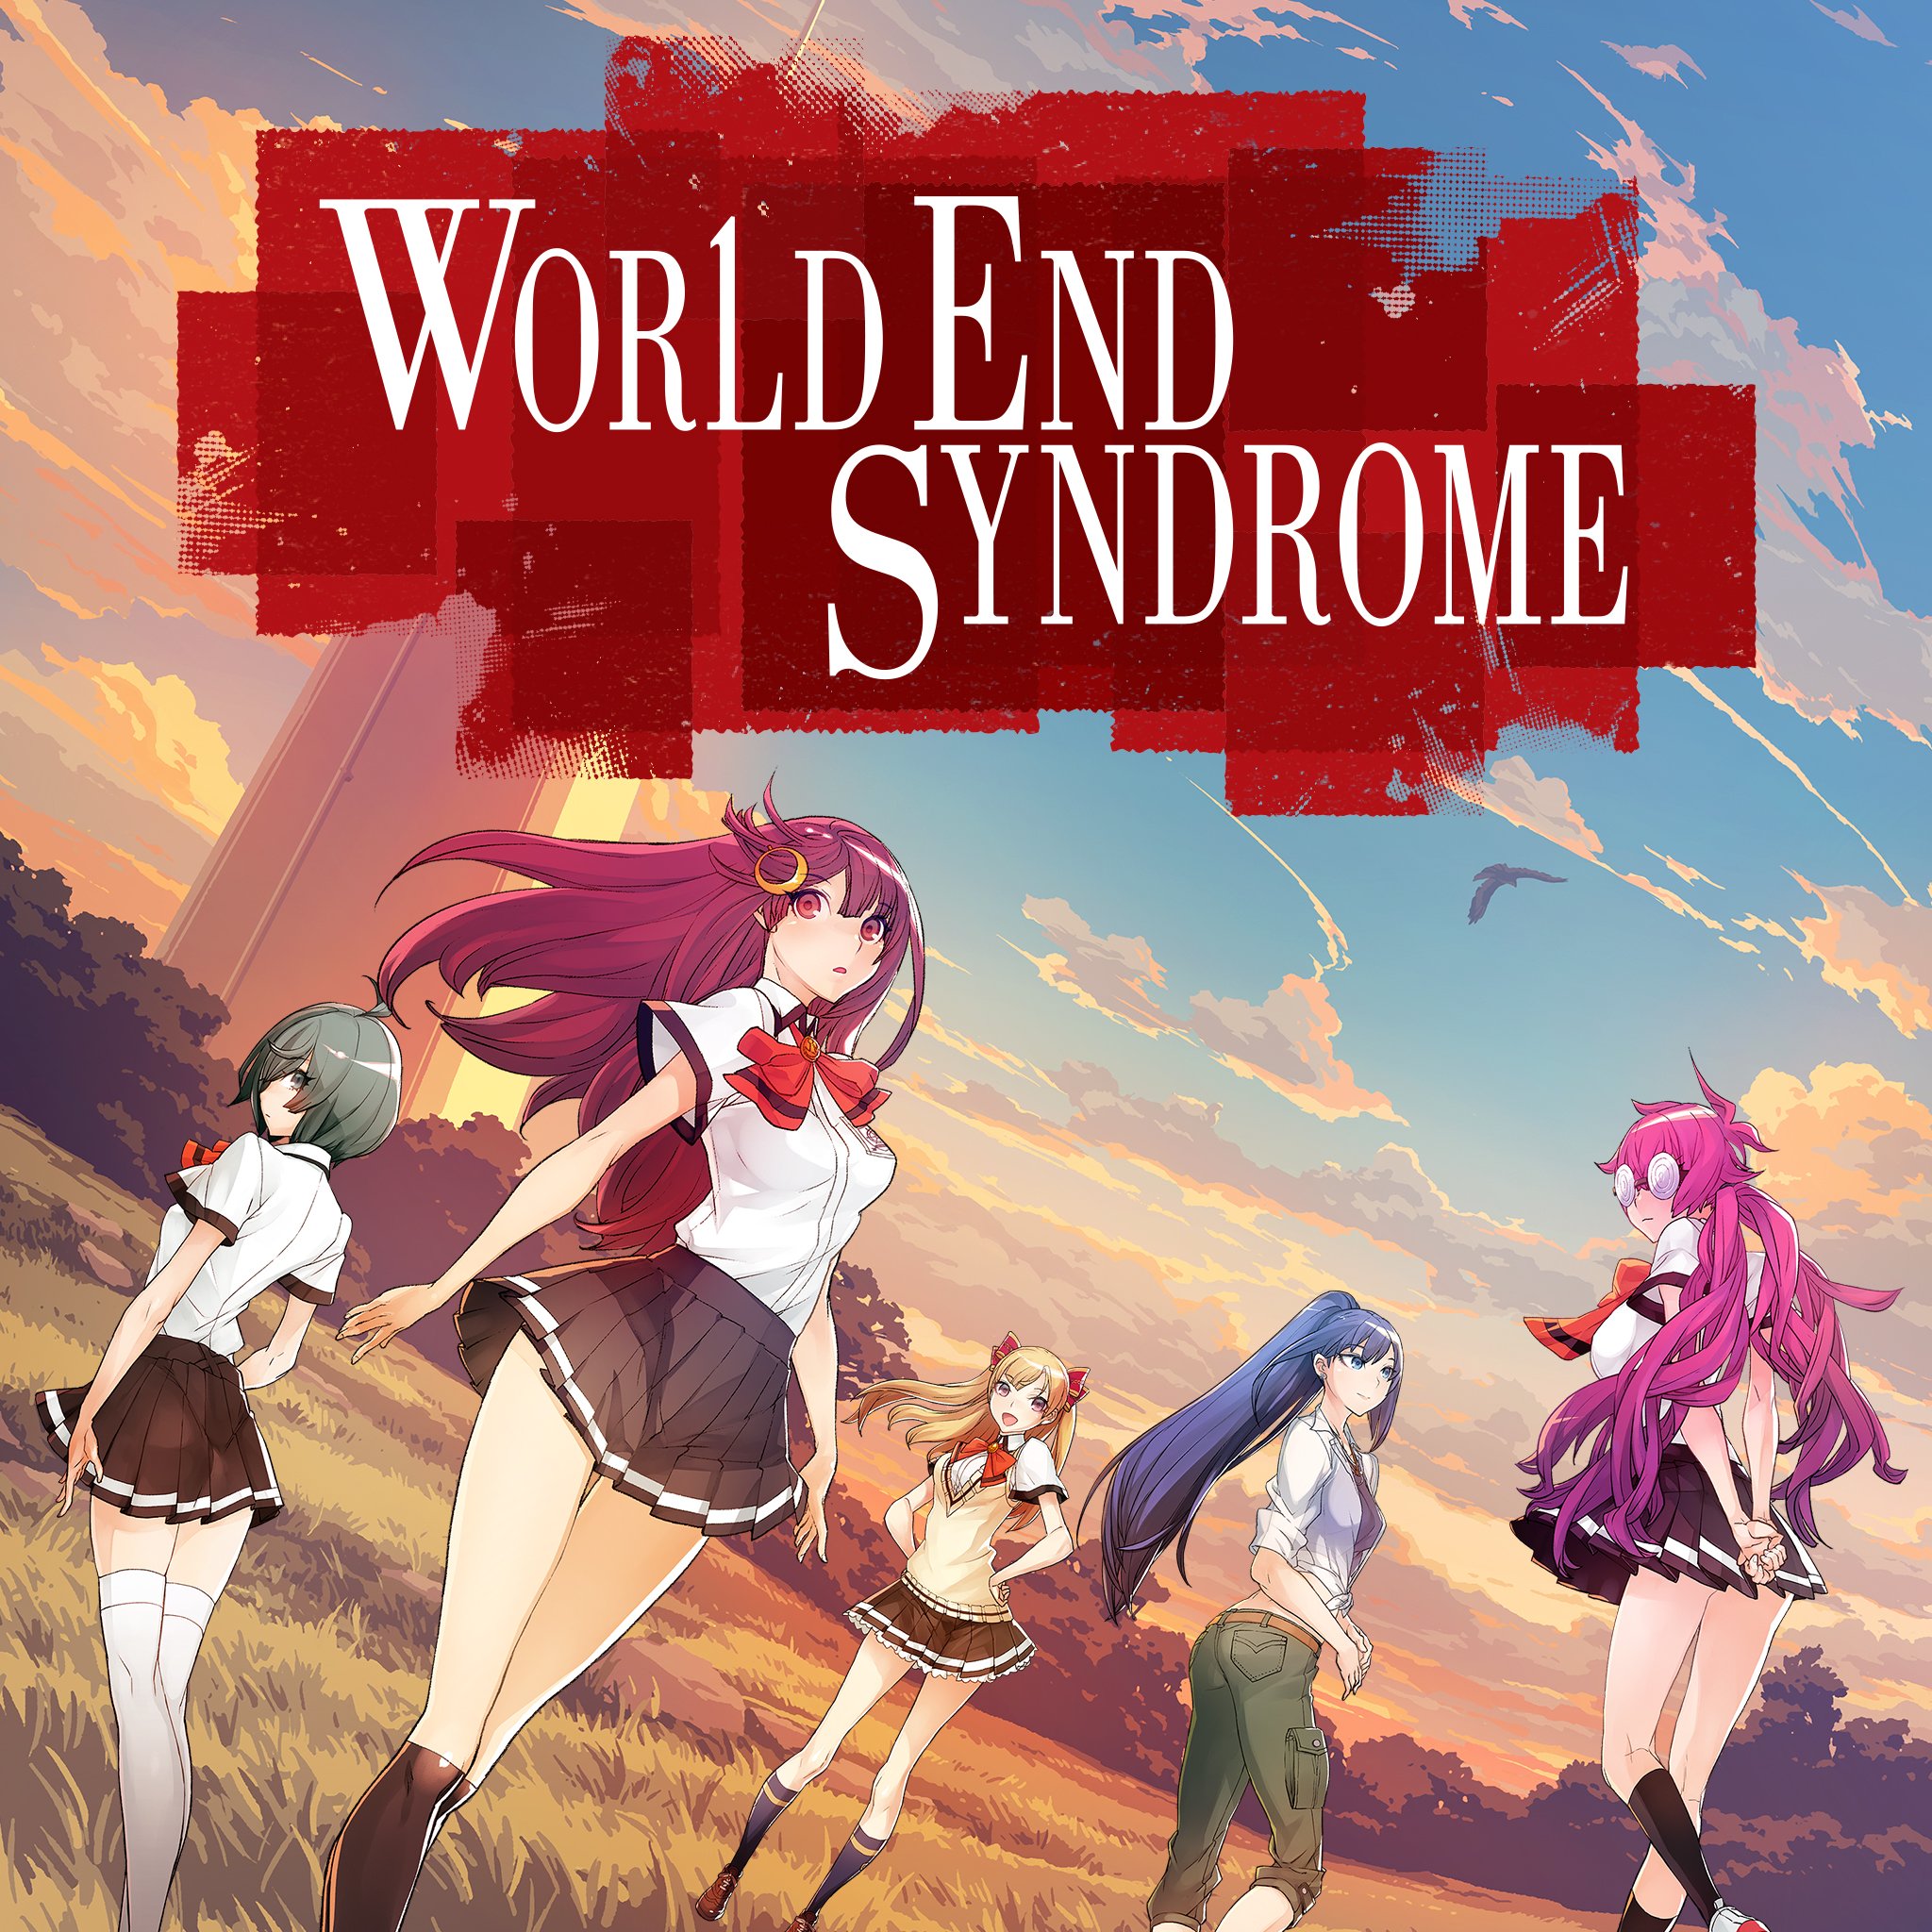 World end syndrome Switch - Nintendo Switch Games